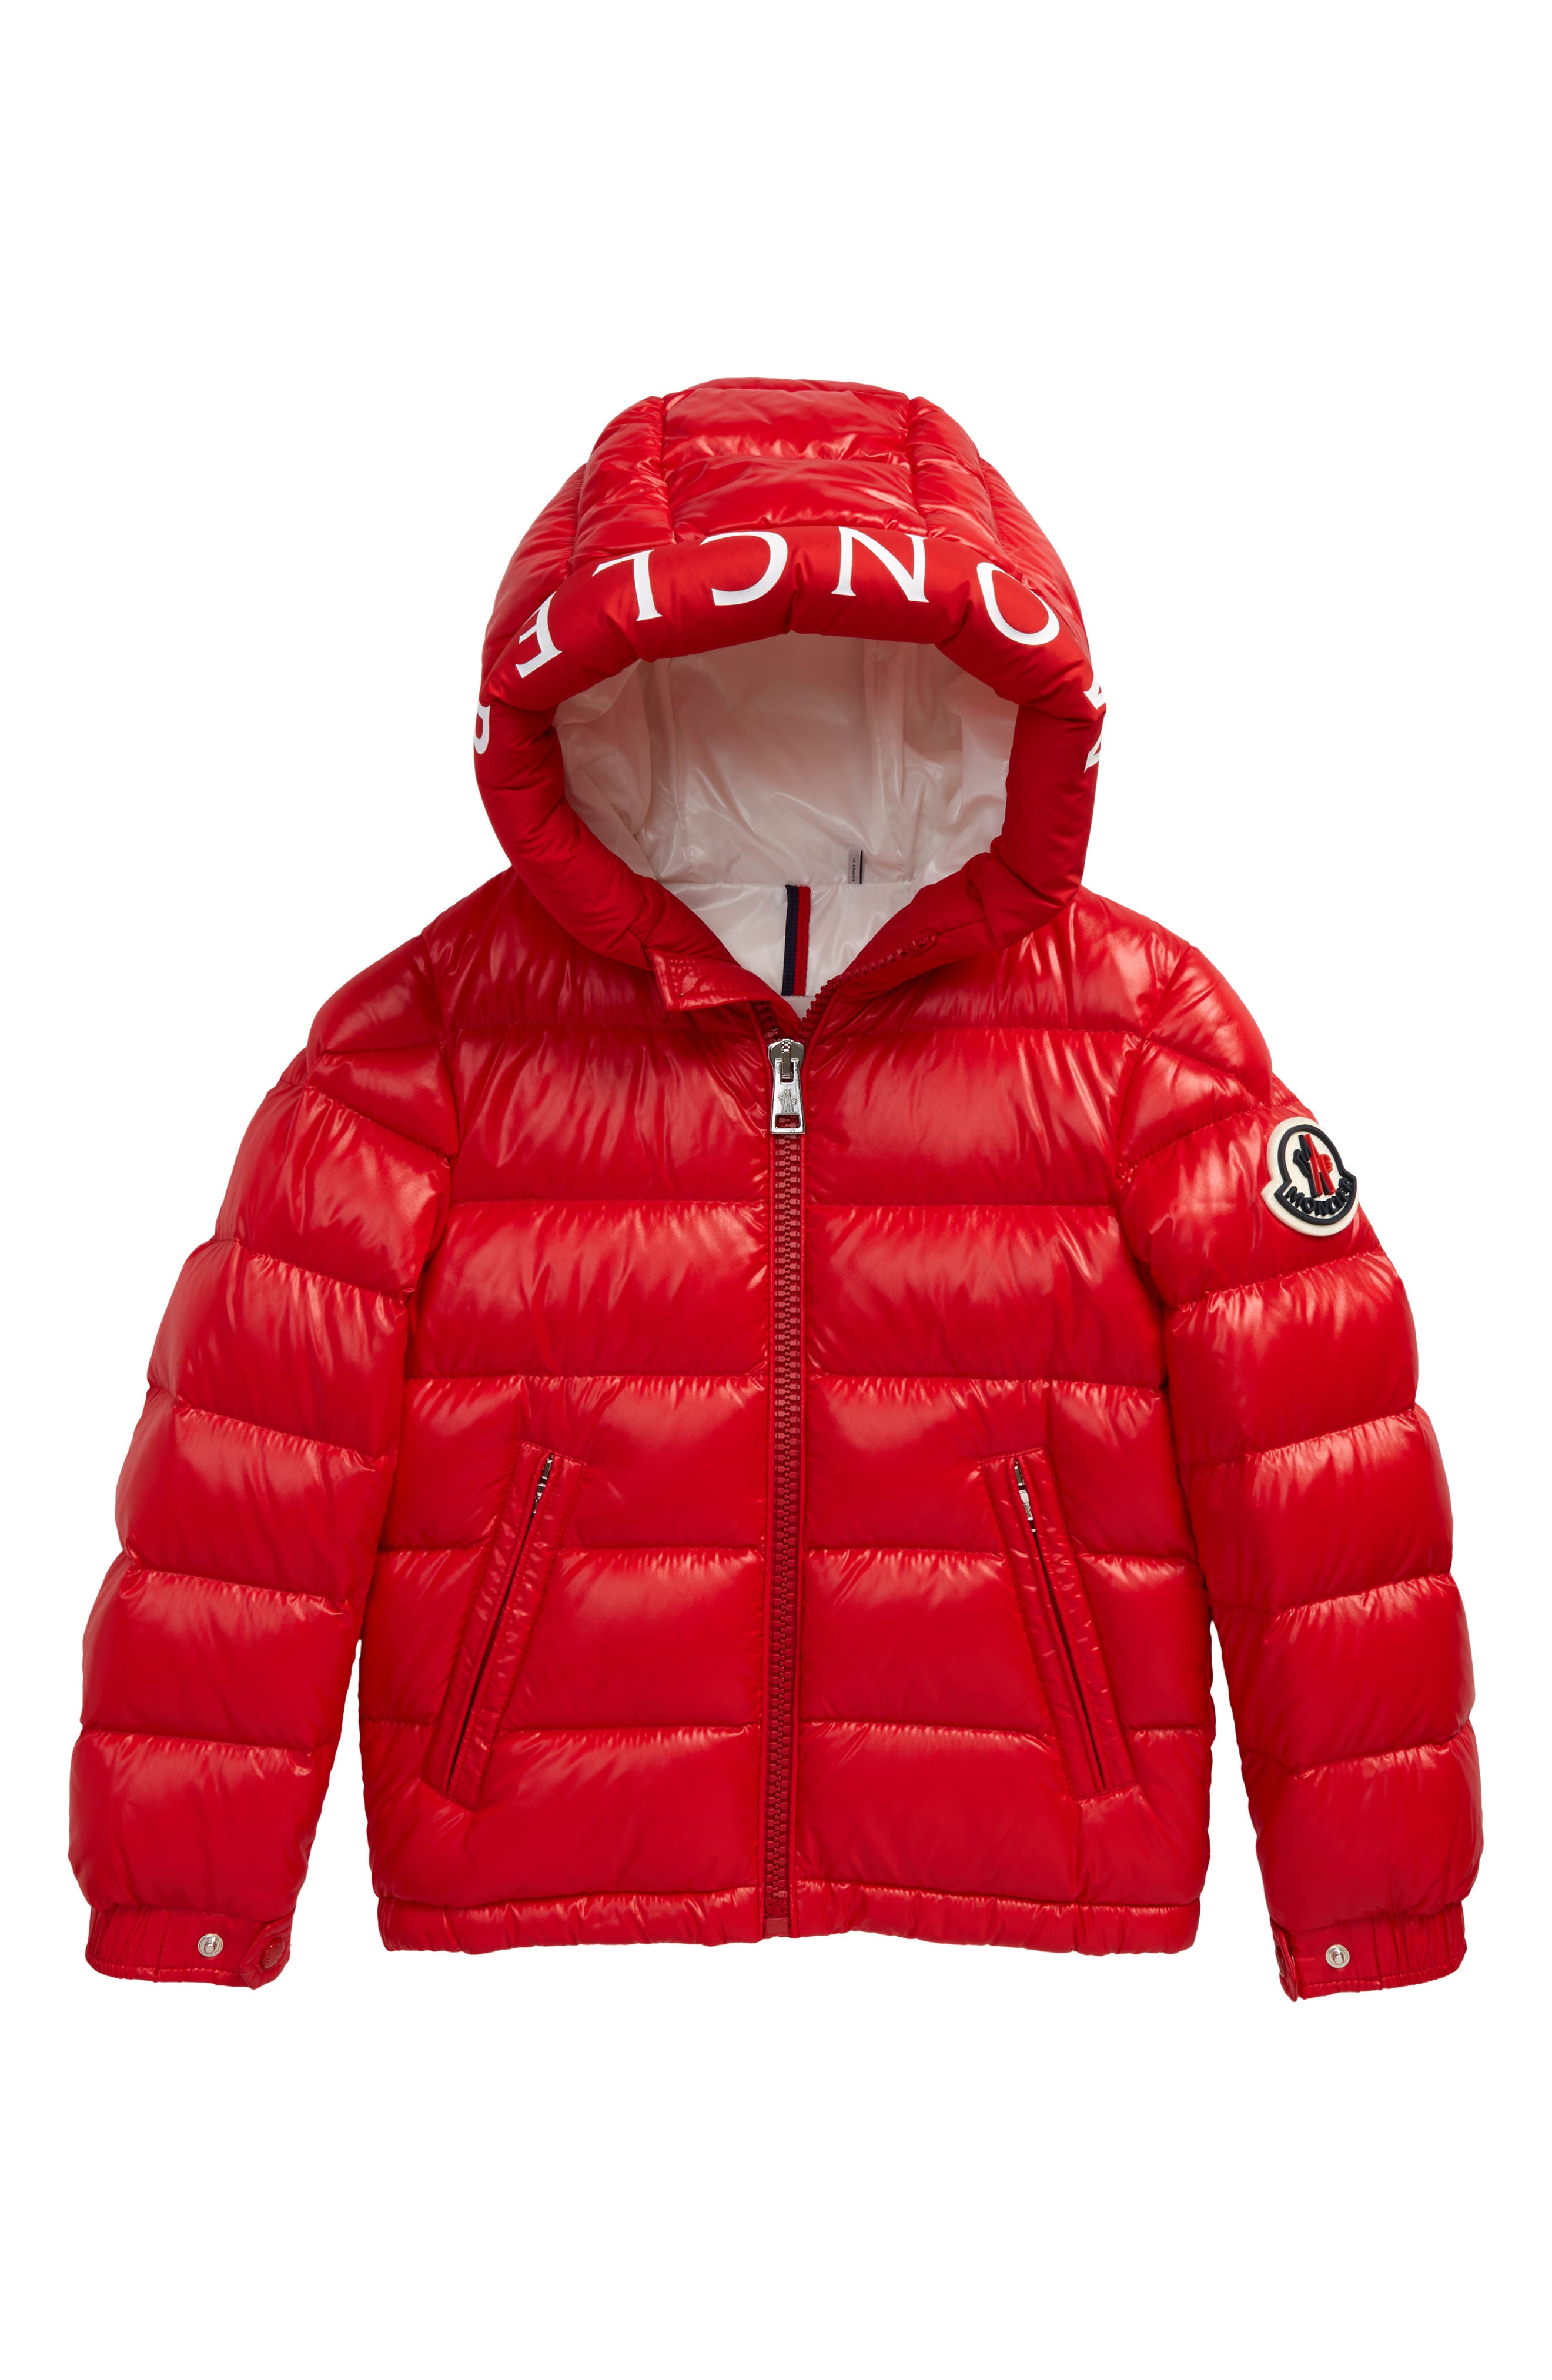 Boys' Red Coats ☀ Jackets | Nordstrom